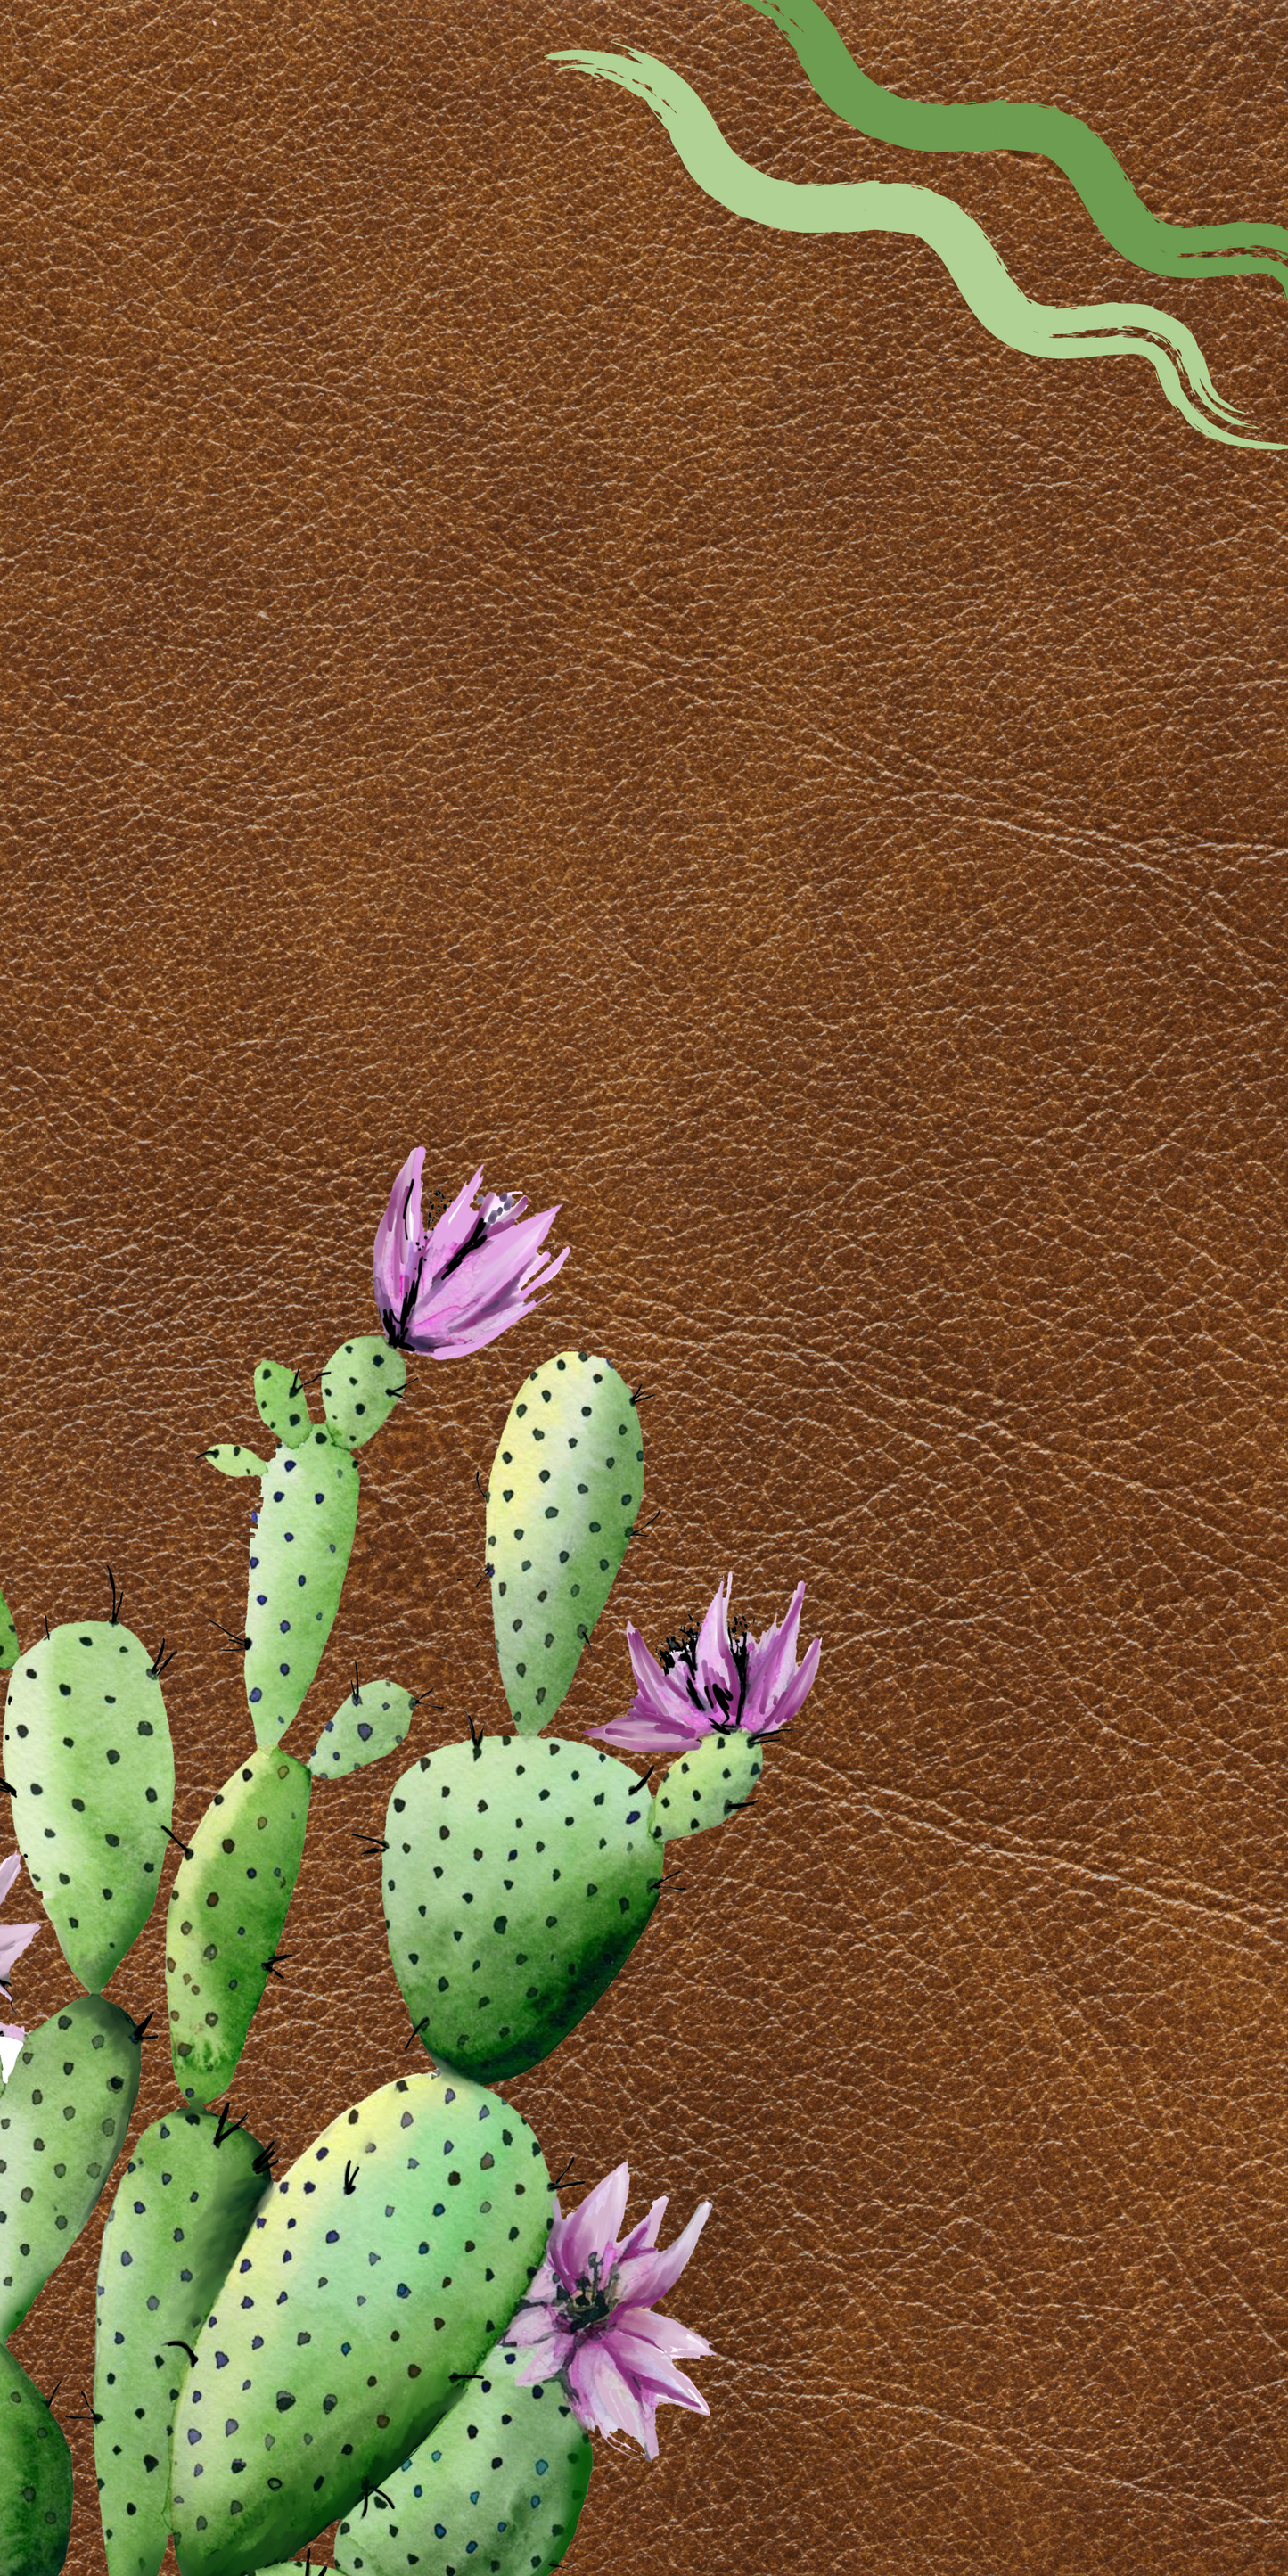 It's Show Time Livestock Show Hiefer iPhone and Android Phone Wallpaper - Serape Cheetah Leather Design